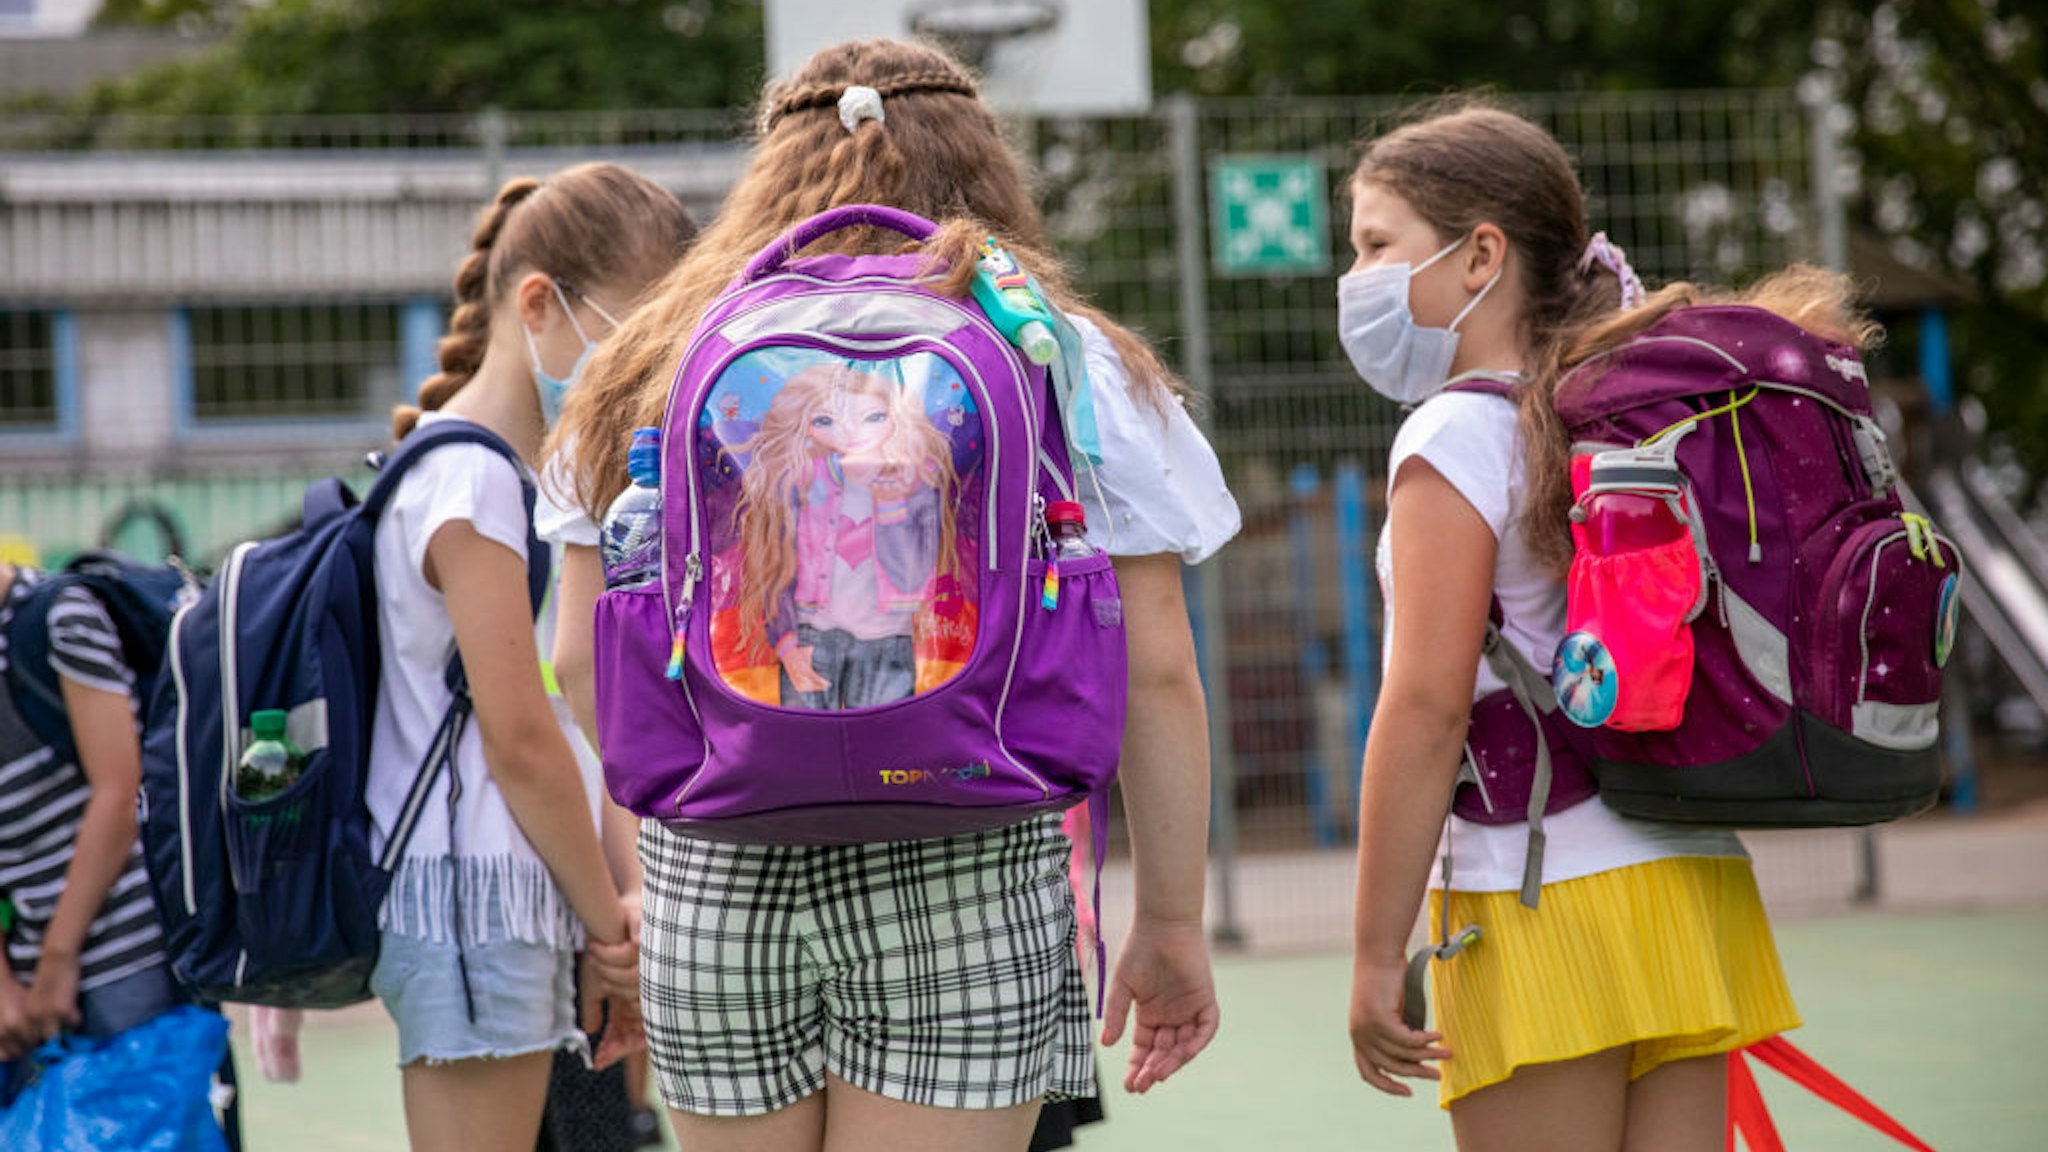 BERLIN, GERMANY - AUGUST 10: Children wearing protective face masks arrive for the first day of classes of the new school year at the GuthsMuths elementary school during the coronavirus pandemic on August 10, 2020 in Berlin, Germany. Classes at schools across Germany are beginning this month with face mask requirements varying by state. Coronavirus infection rates are climbing again in Germany, from an average of 400 new cases per day about two weeks ago to over 1,100 yesterday, according to the Robert Koch Institute. (Photo by Maja Hitij/Getty Images)